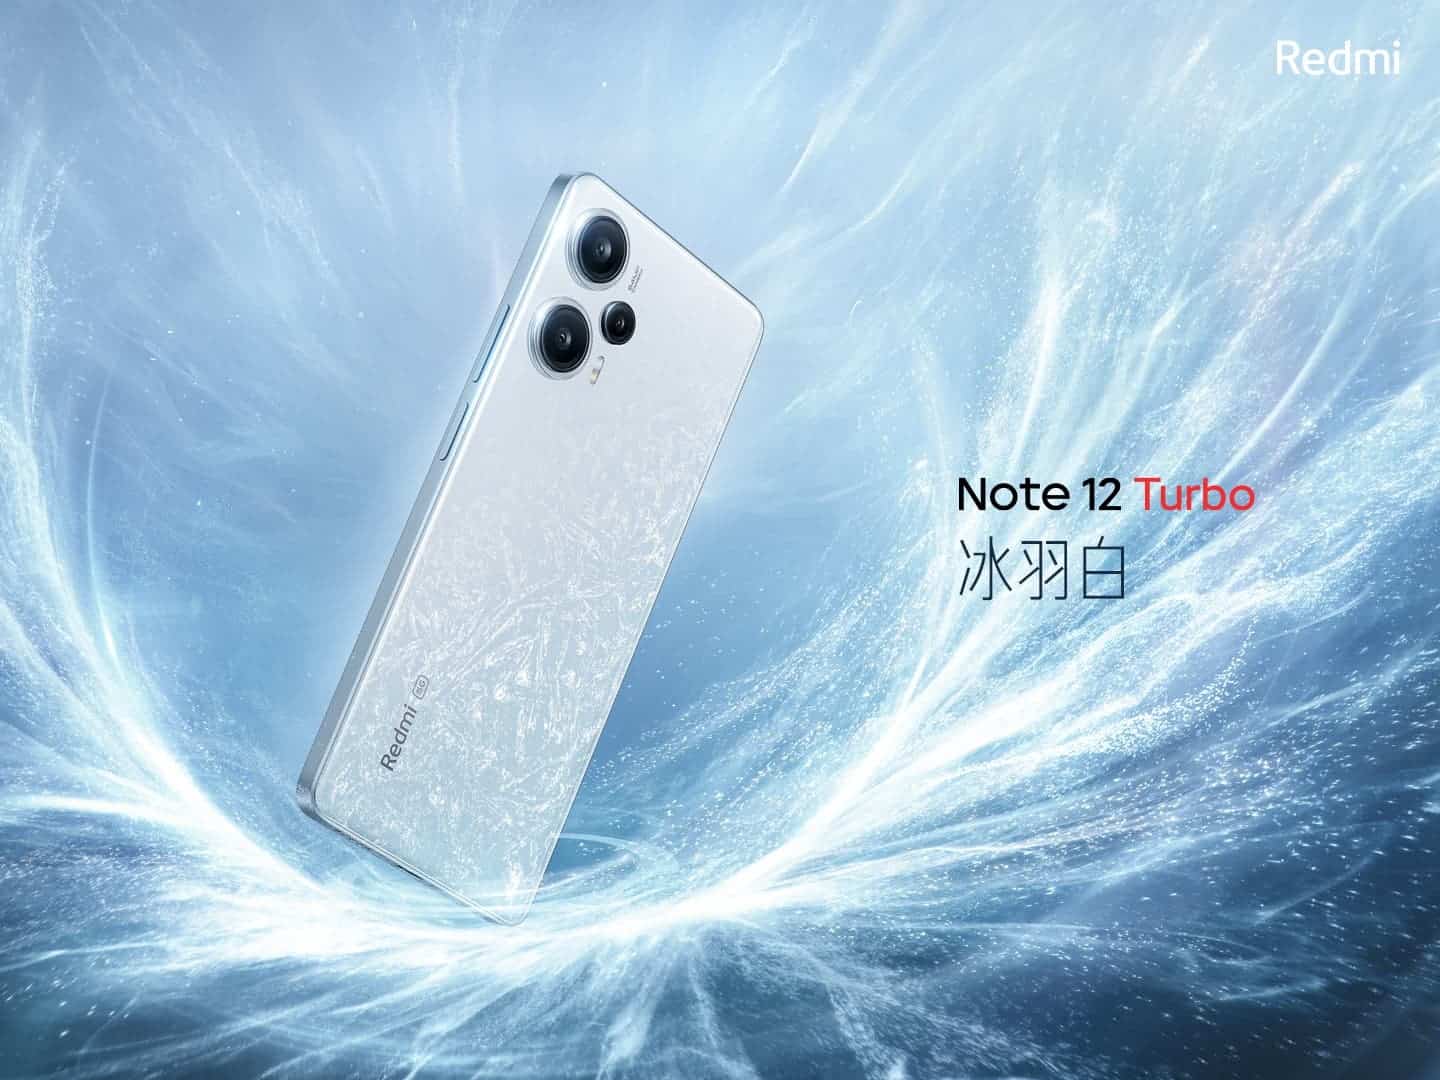 Redmi Note 12 Turbo 1TB version is already in serious short supply